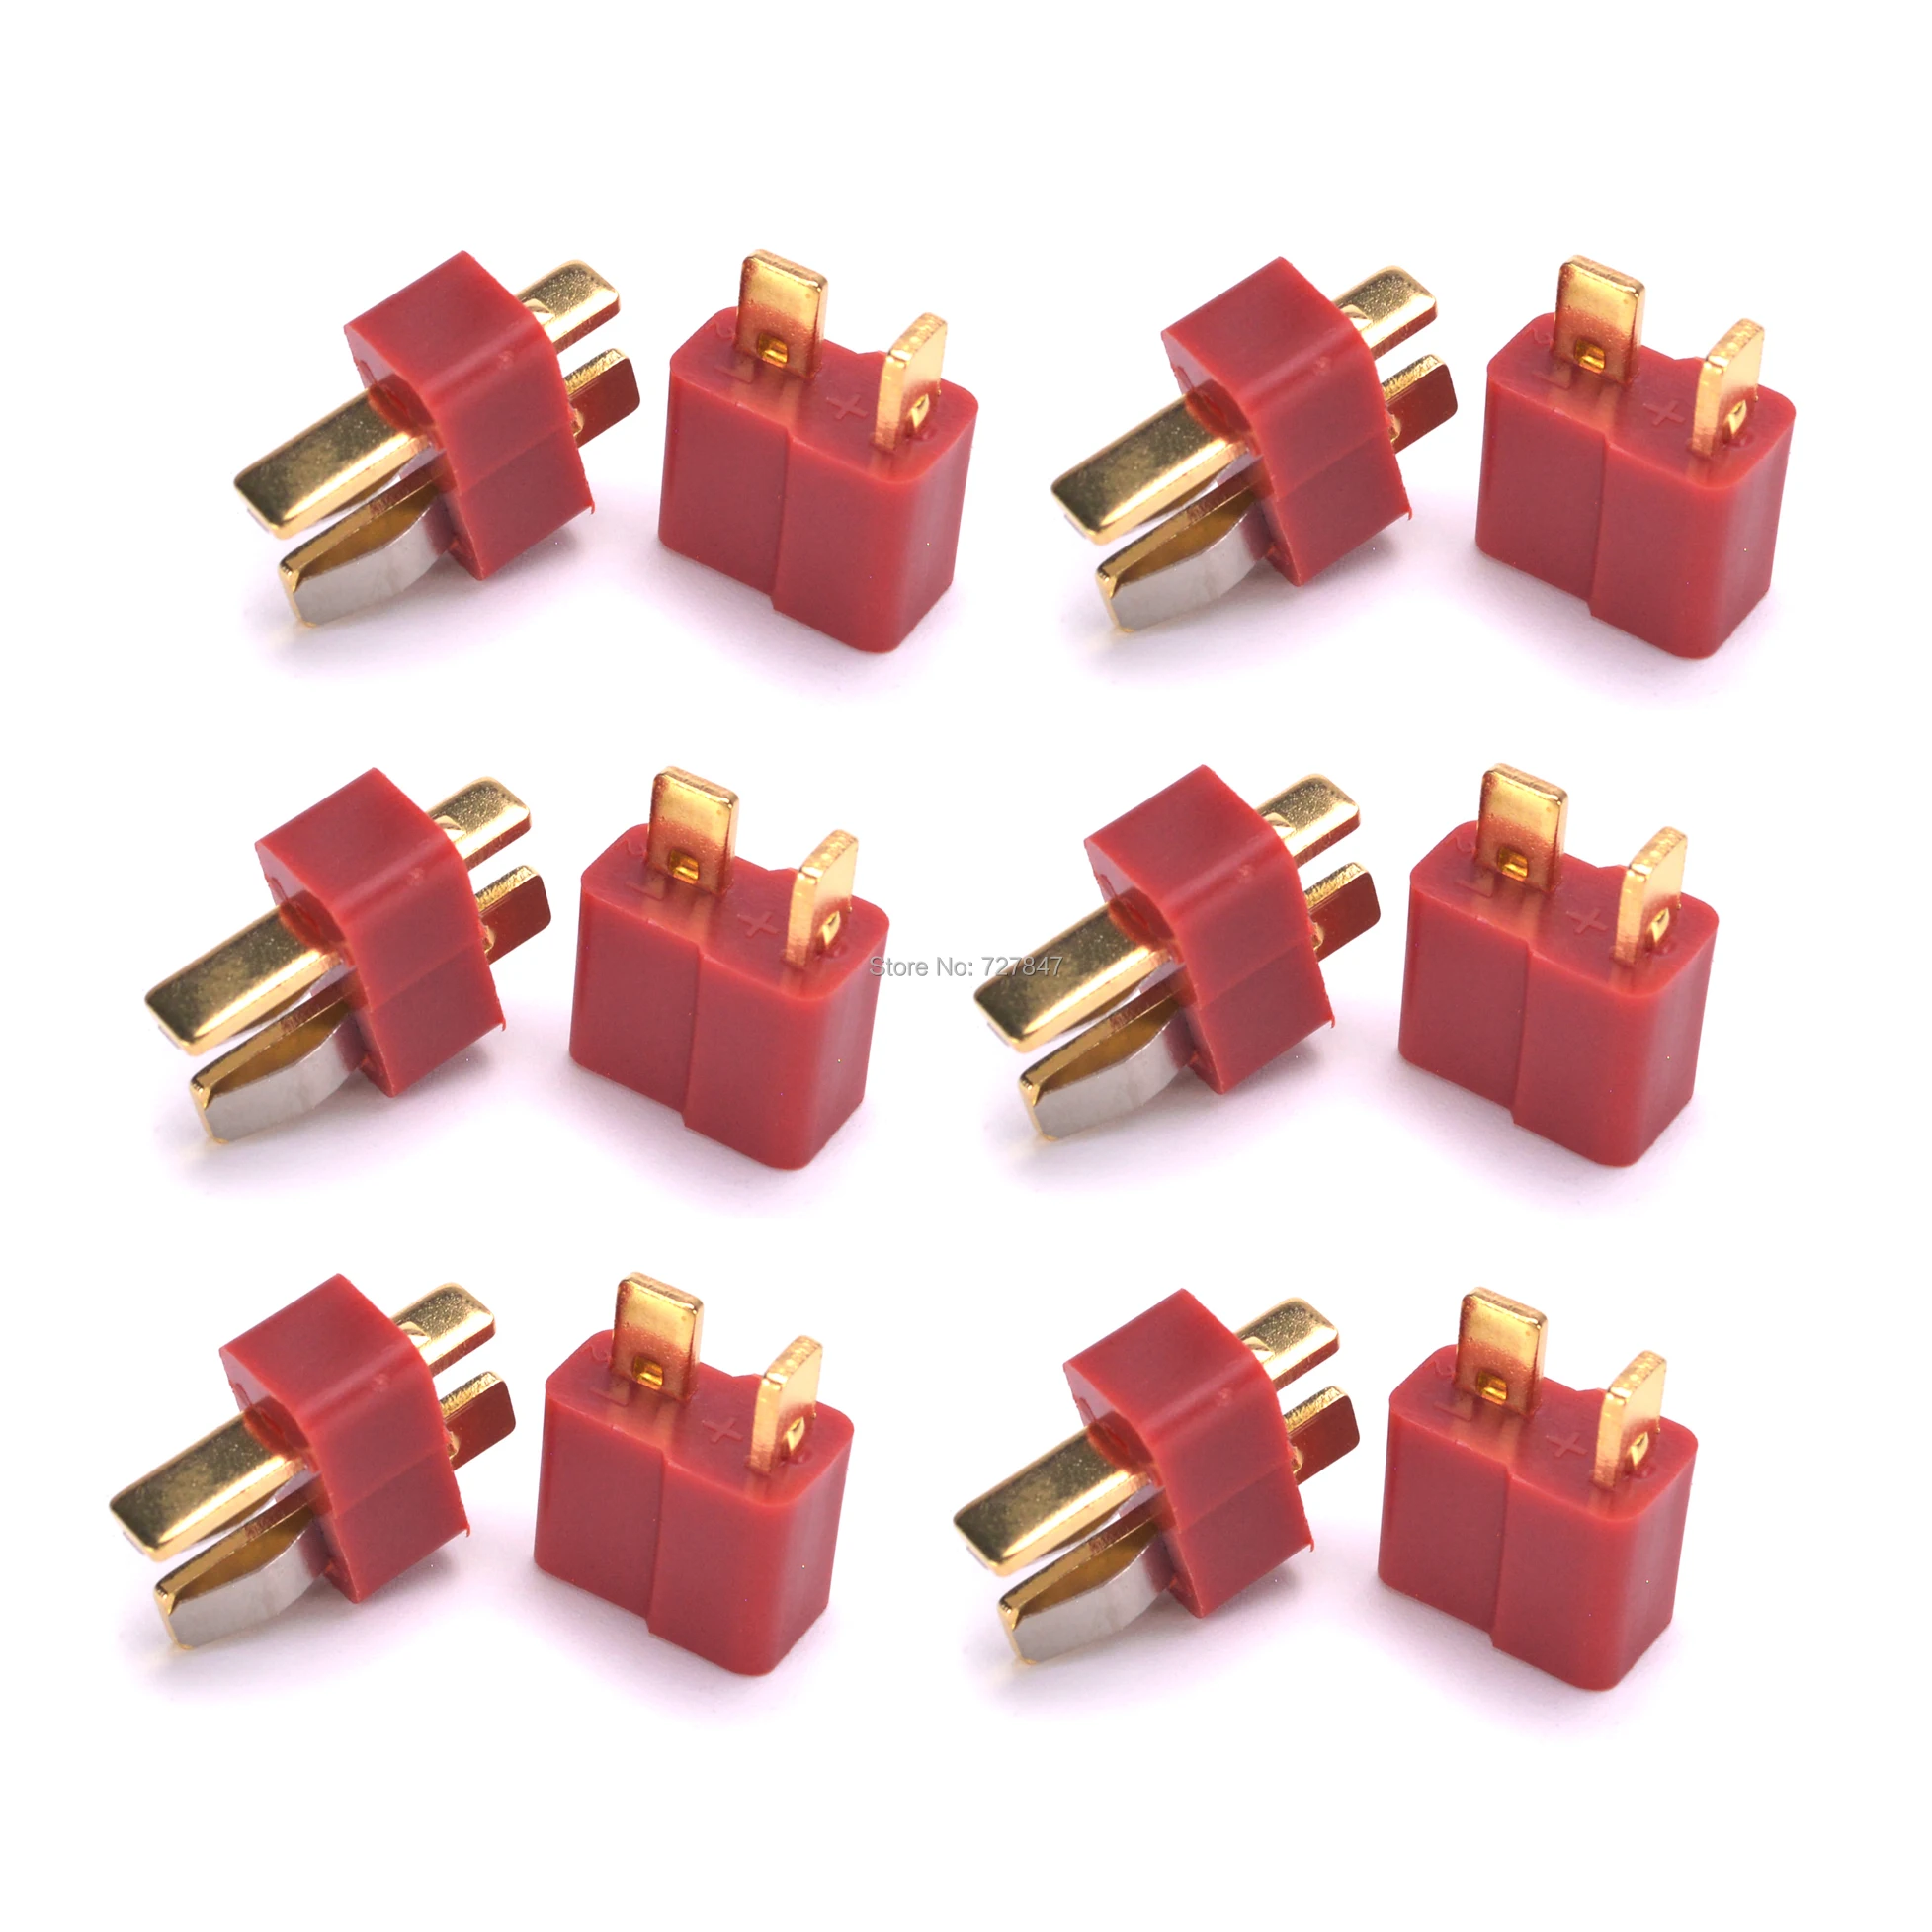 10 Pairs T Plug Connector Male & Female for RC LiPo Battery ESC Helicopter